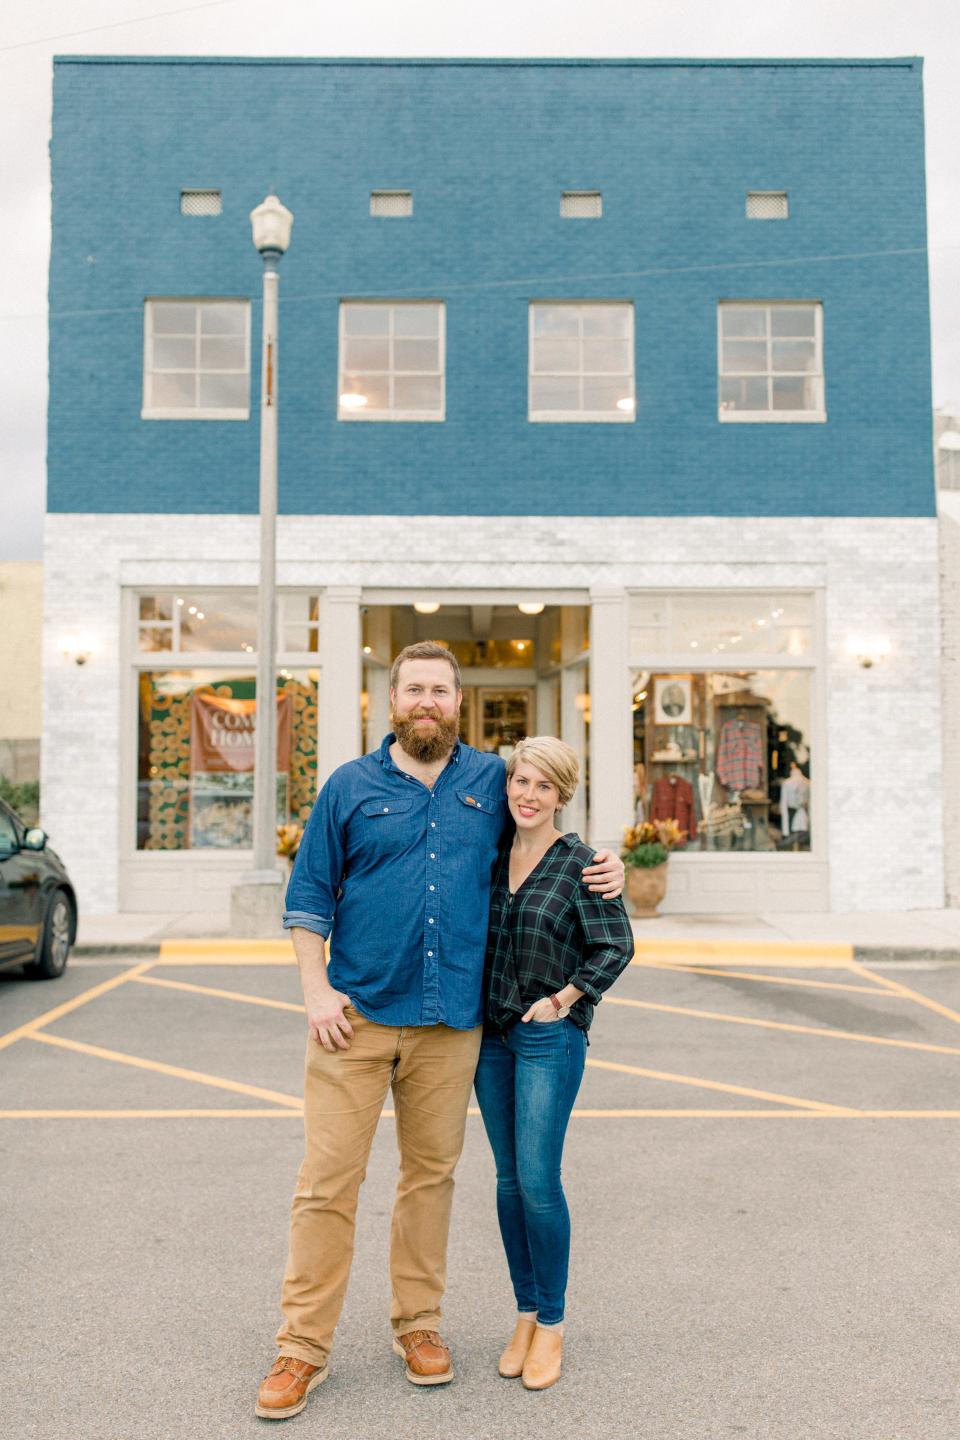 Ben and Erin Napier are remaking Laurel, Miss., with their own hands. The couple stars in the HGTV’s series “Home Town,” where they renovate historic homes.